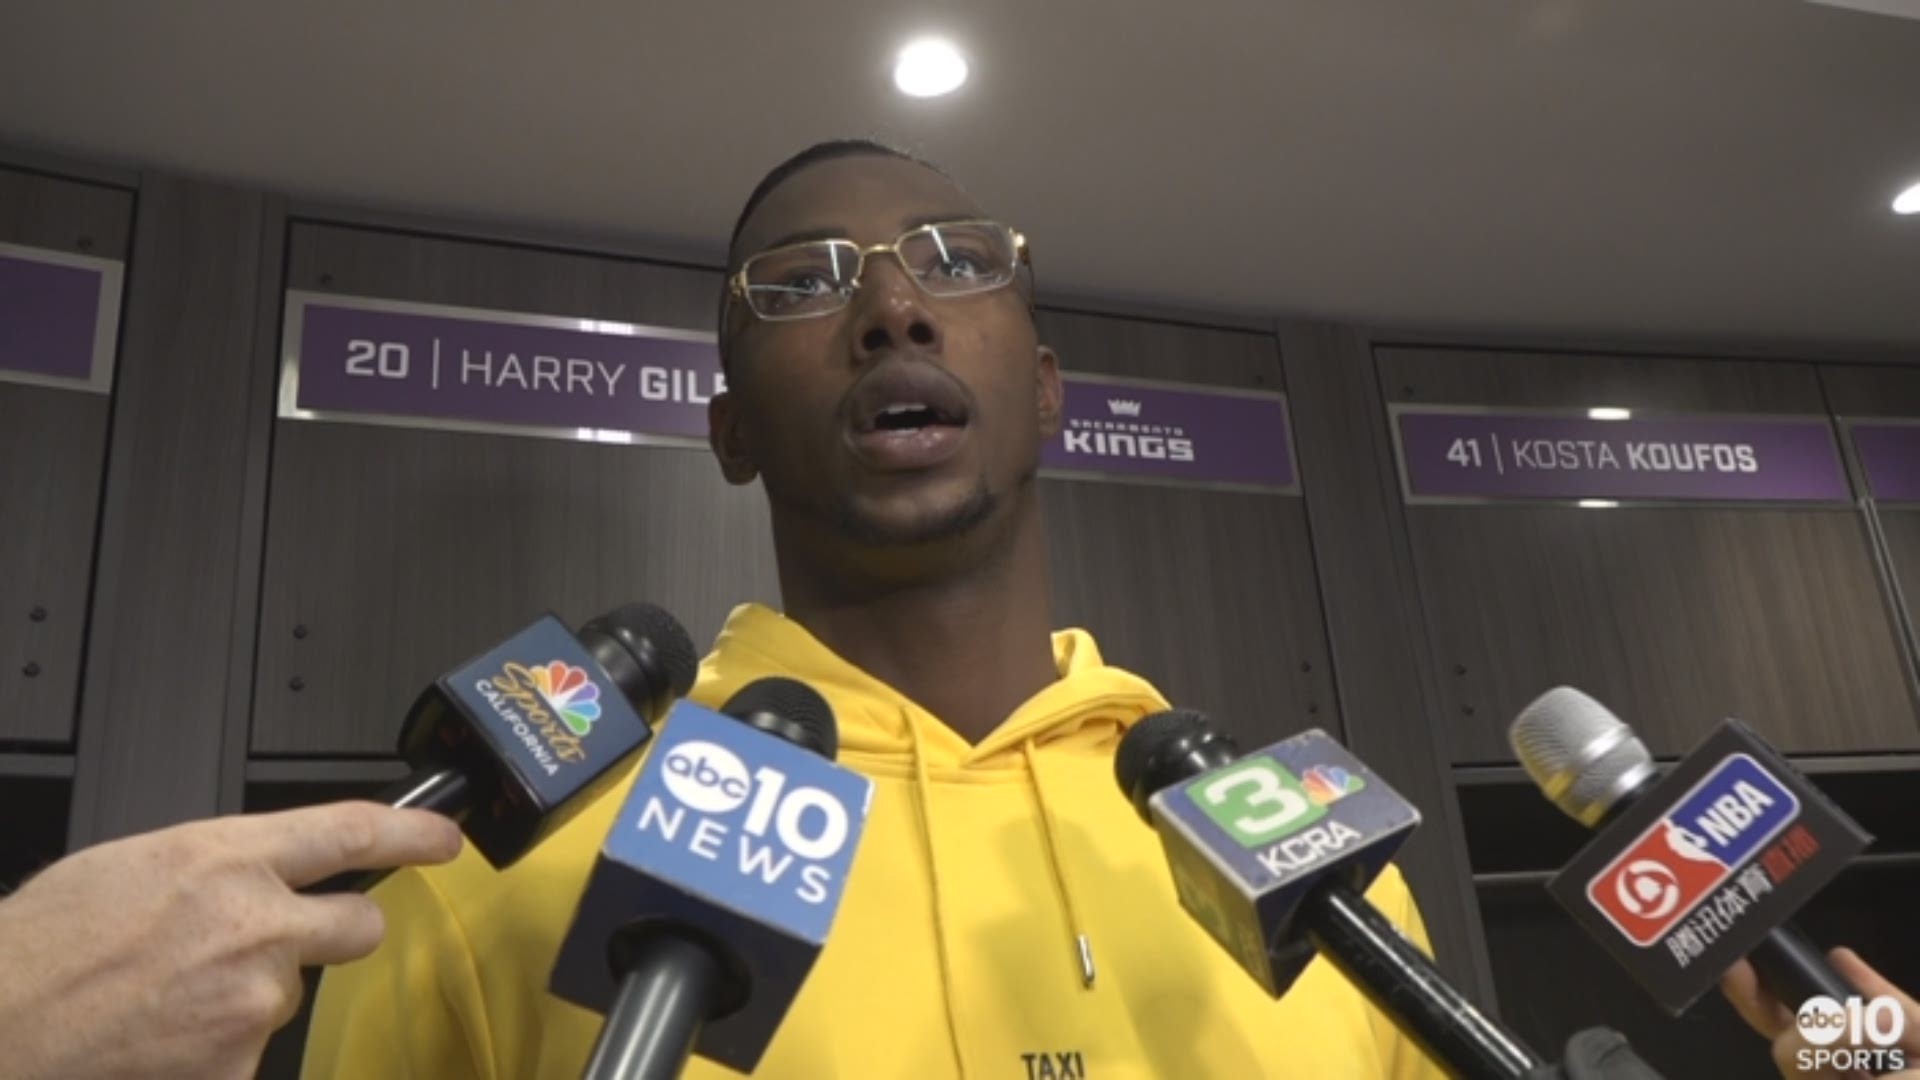 Sacramento Kings forward Harry Giles discusses Monday's 32-point preseason victory over Isreal's Maccabi Haifa and what he knows about his team with just two more exhibition games left before the season opens next Wednesday.